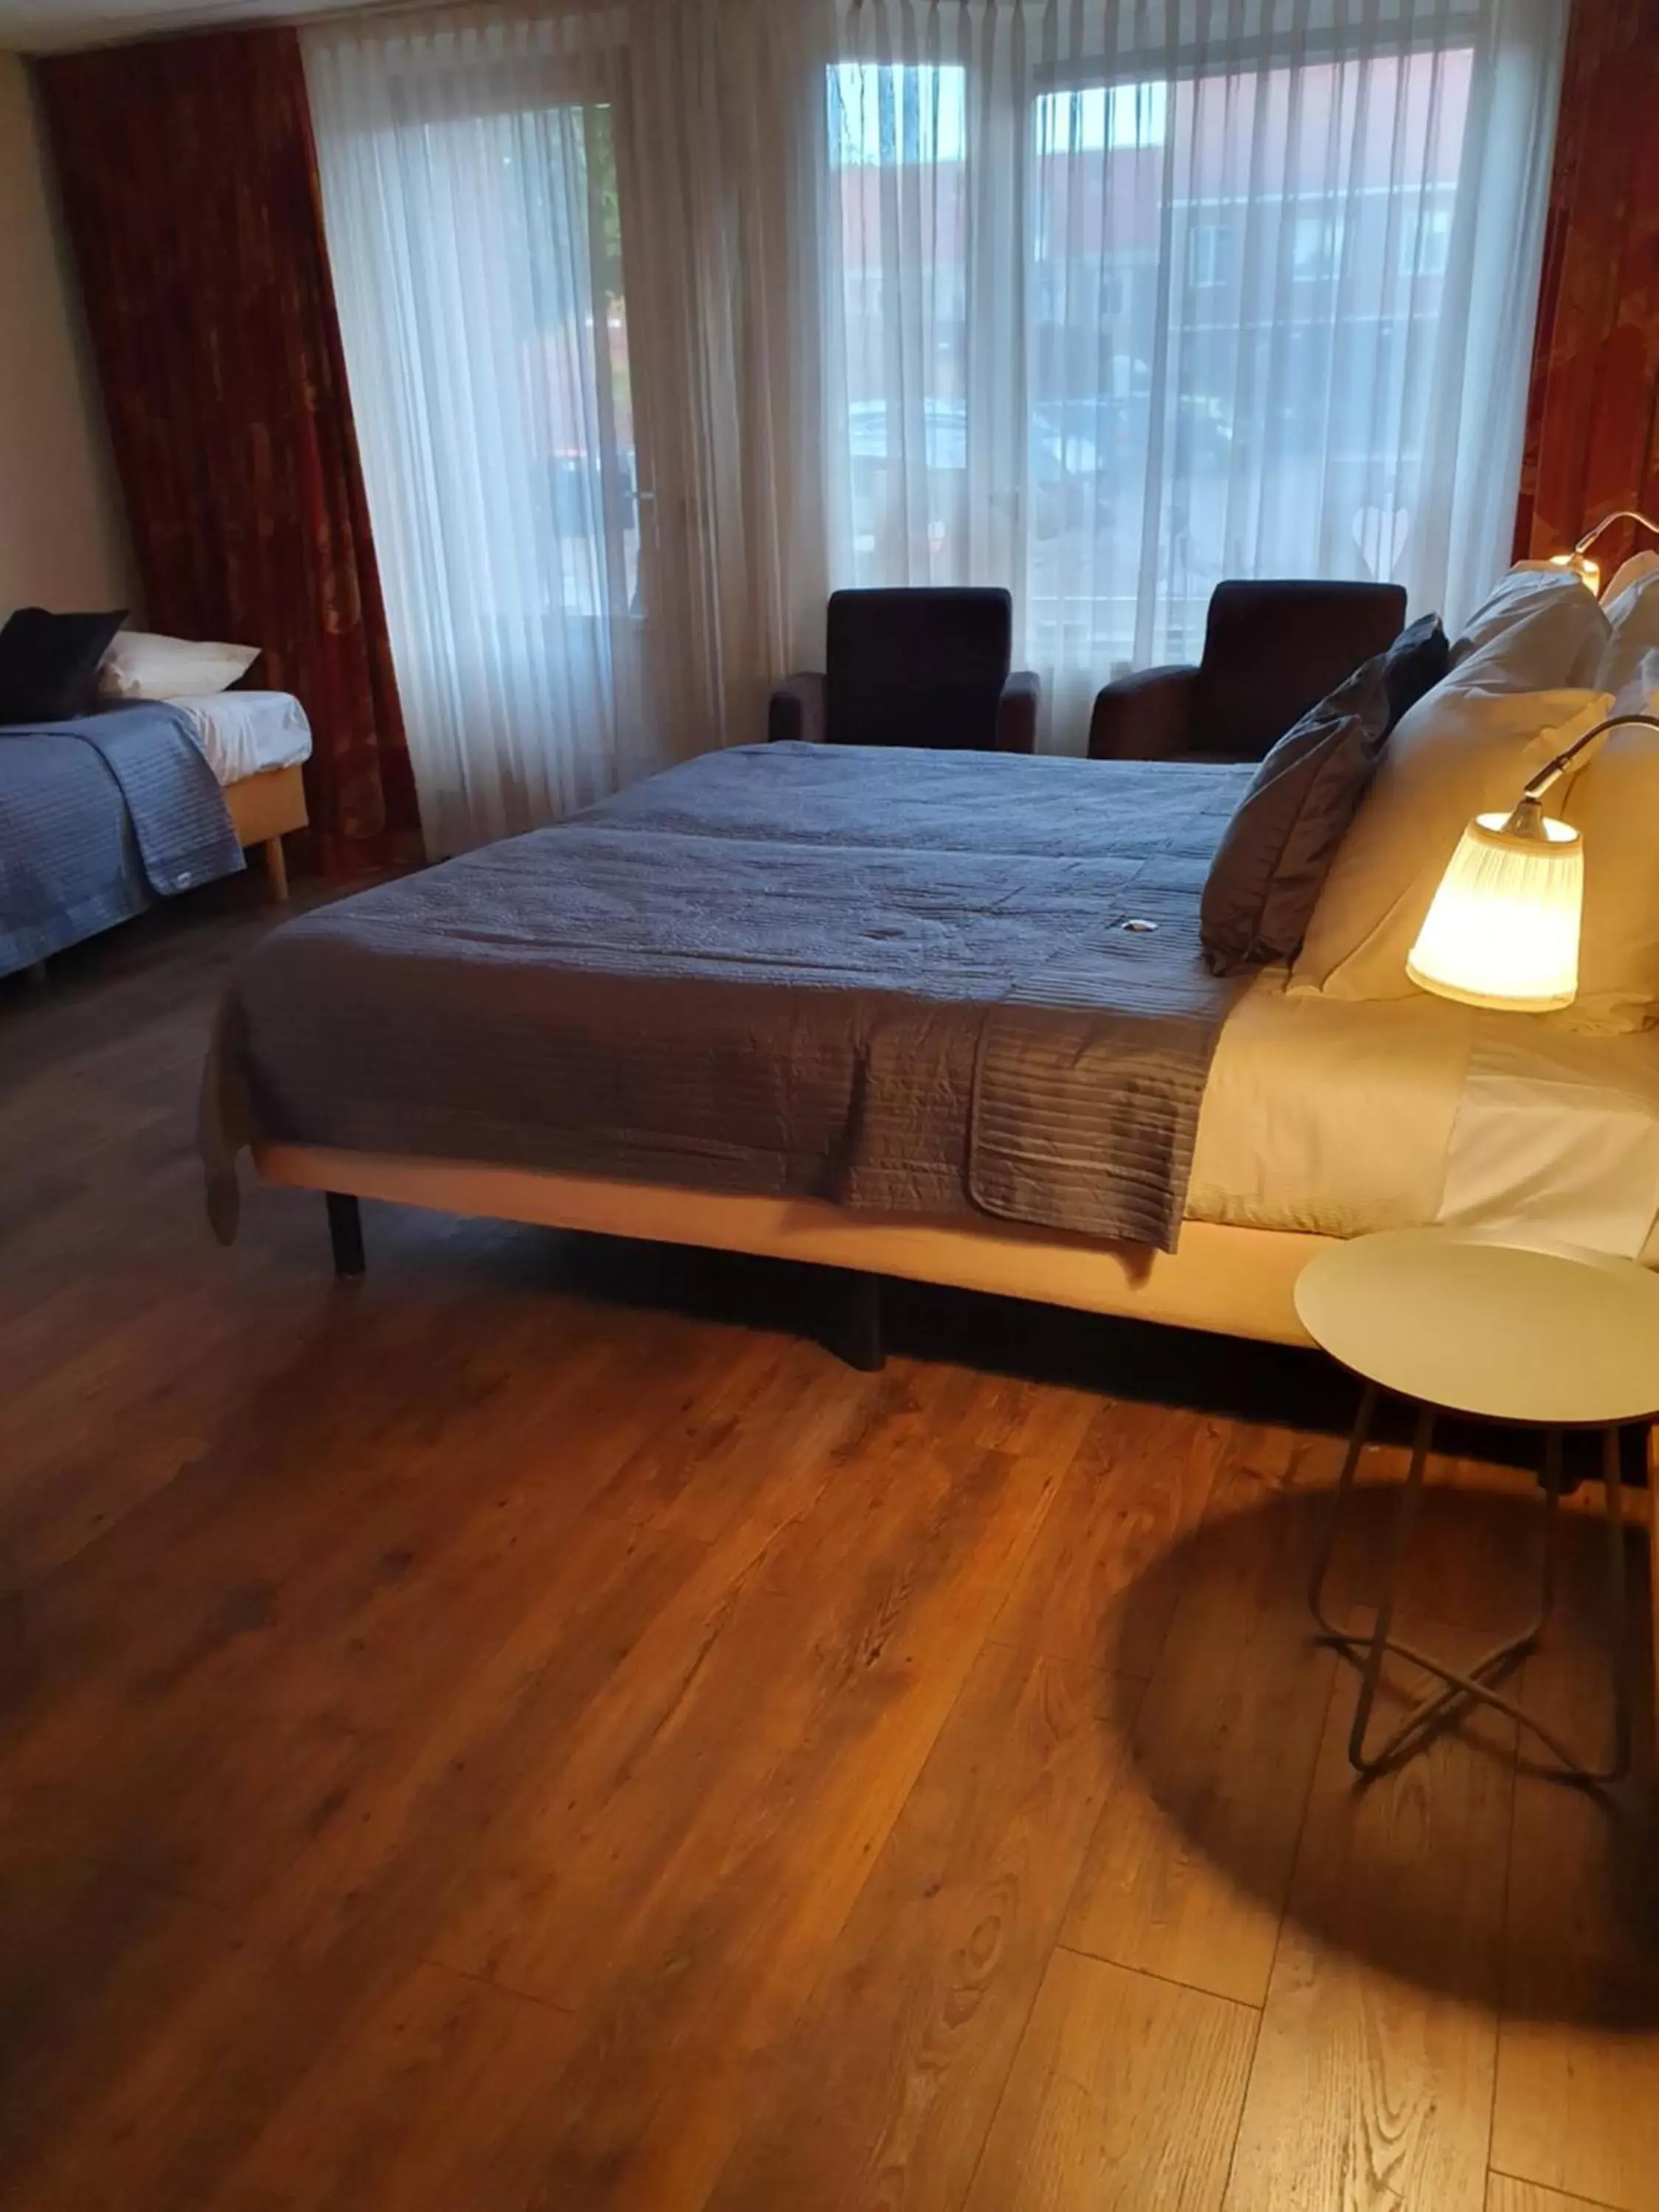 Bed in City Hotel Meppel